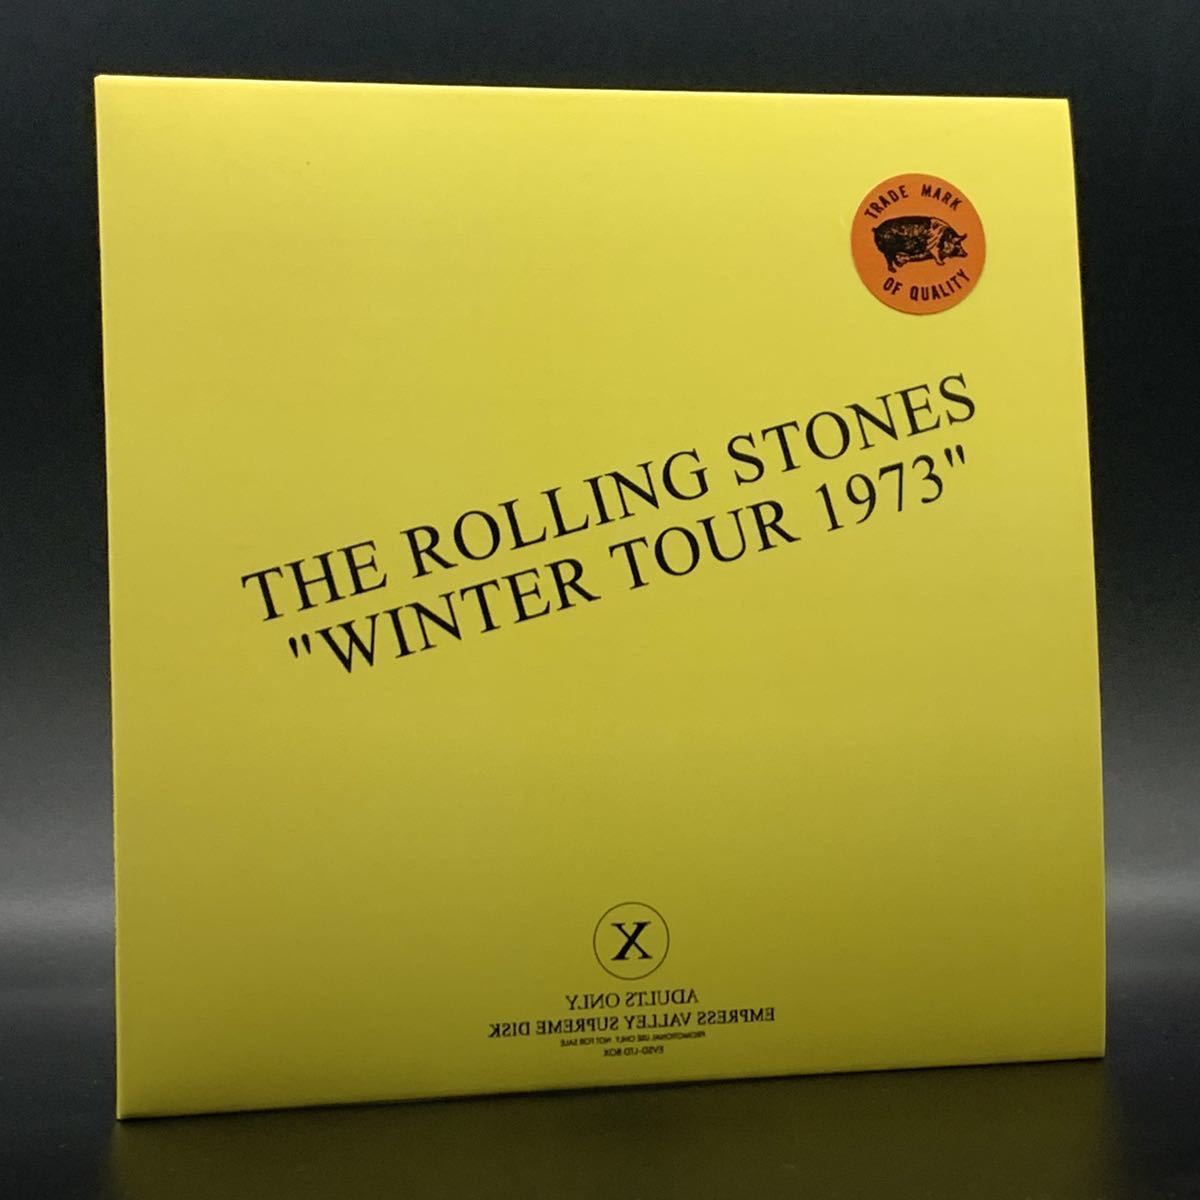 THE ROLLING STONES : WINTER TOUR 1973 「オール・ミート・ミュージック」 1CD 工場プレス銀盤CD ■欧米輸入限定盤■限定100セット 残少！_画像3